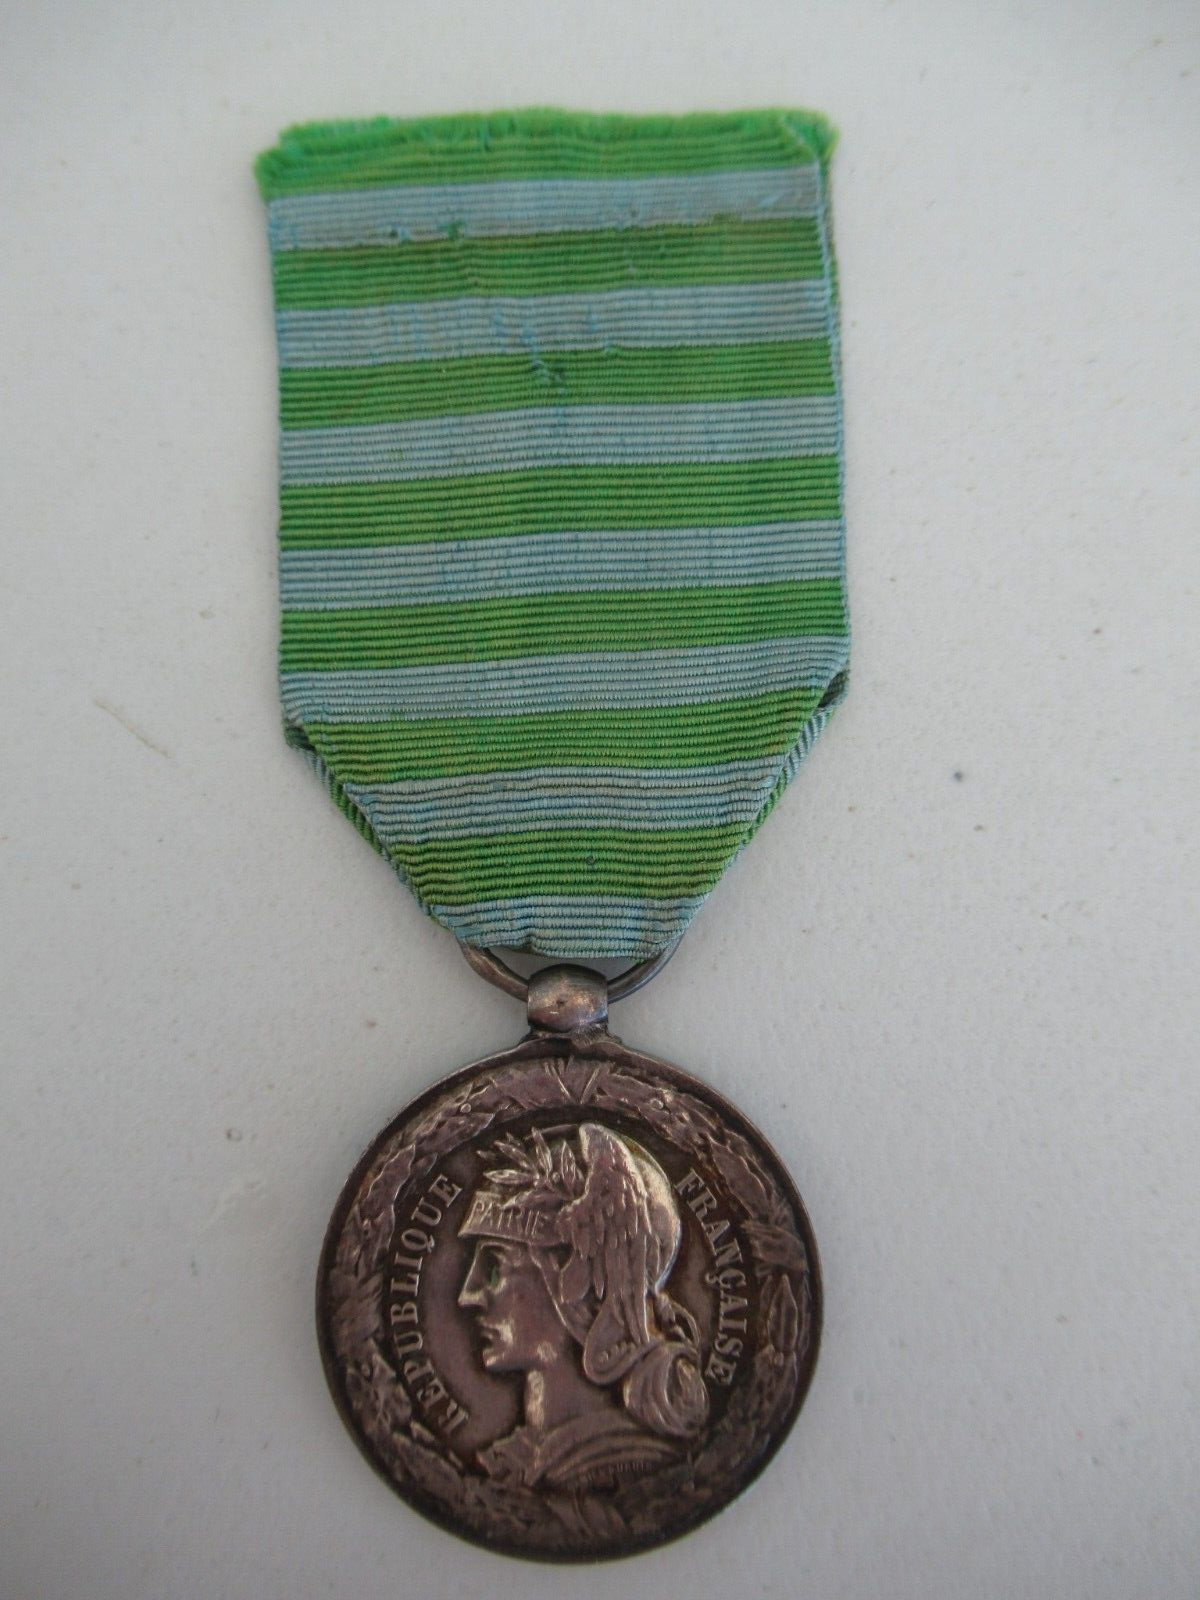 FRANCE COLONIAL FIRST MADAGASCAR EXPEDITION MEDAL 1883 . SILVER. RARE!